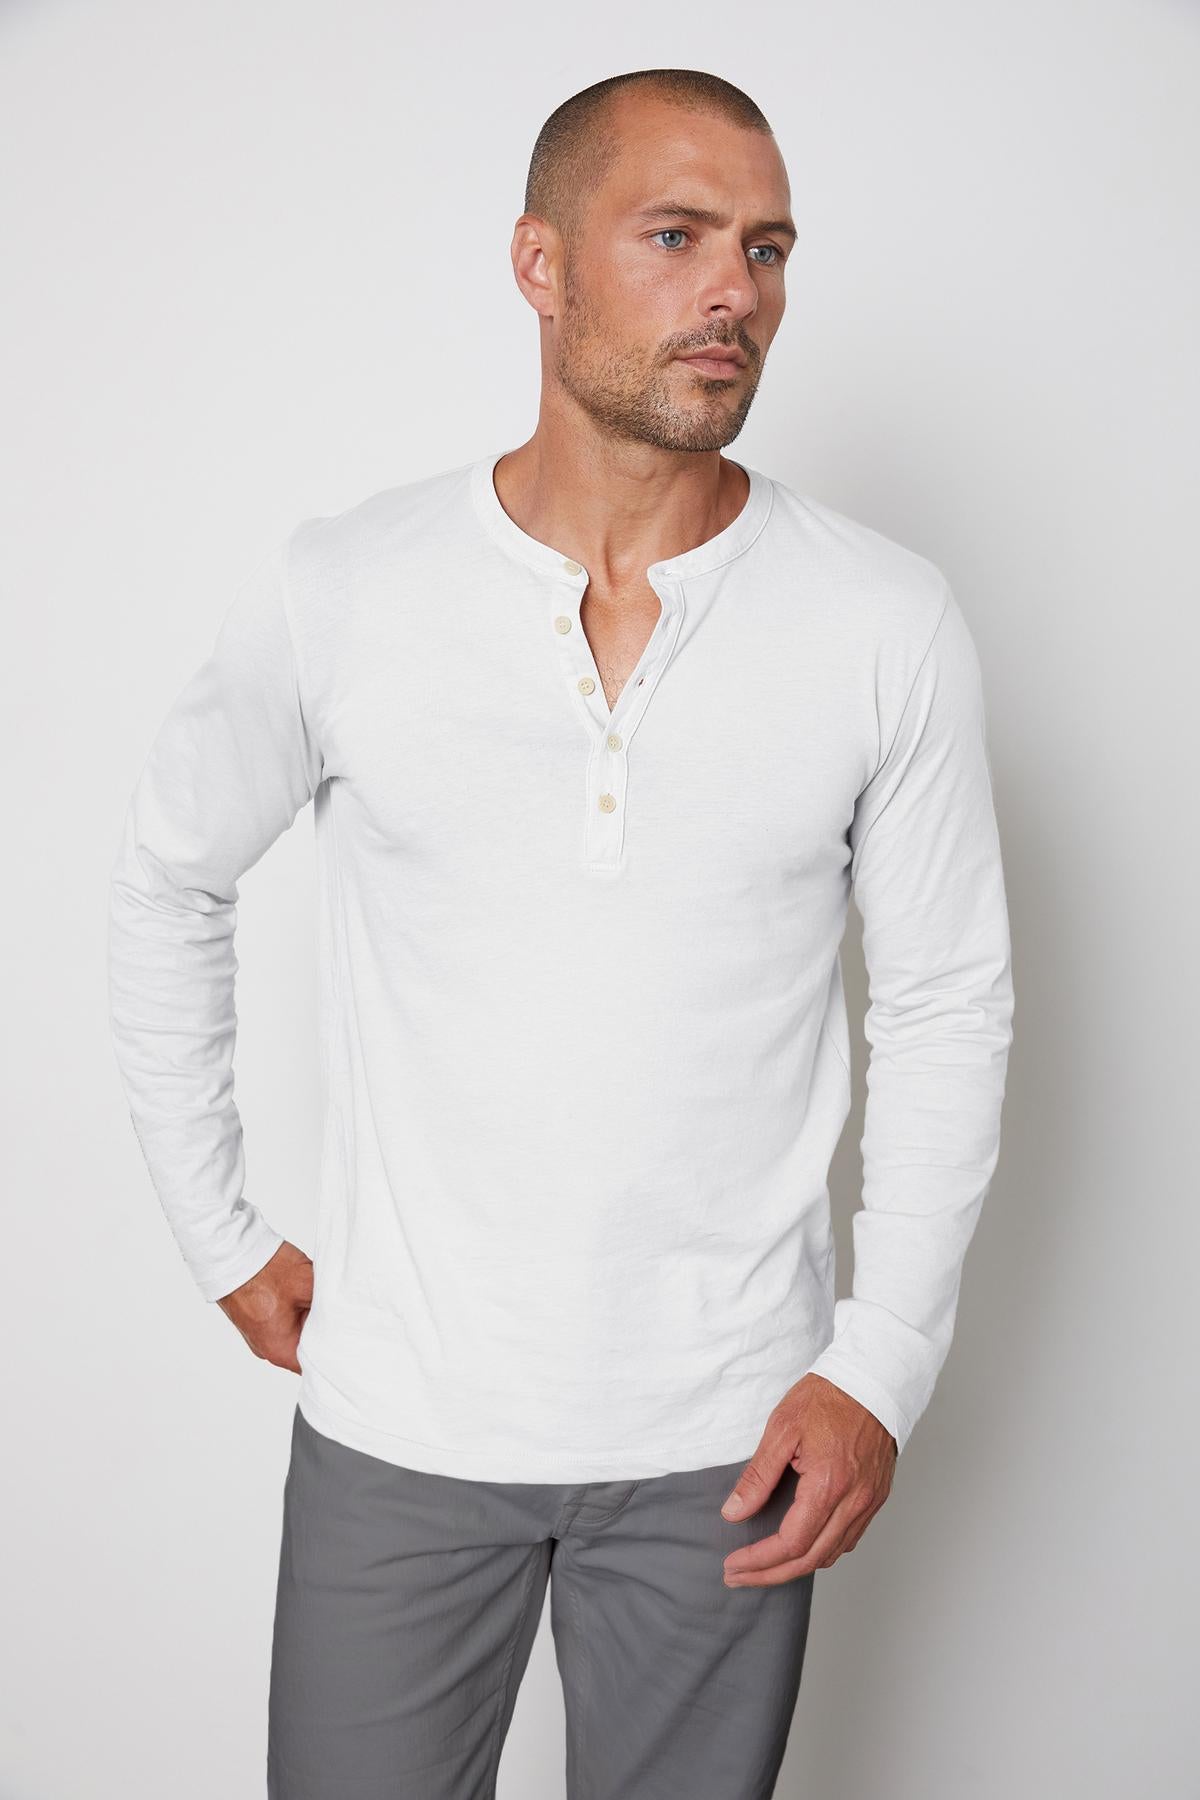 A man with a shaved head and short beard is wearing a white, long-sleeve ALVARO HENLEY shirt by Velvet by Graham & Spencer made from whisper knit fabric and gray pants. He stands with one hand on his hip, looking slightly to the side against a plain background.-36273890296001